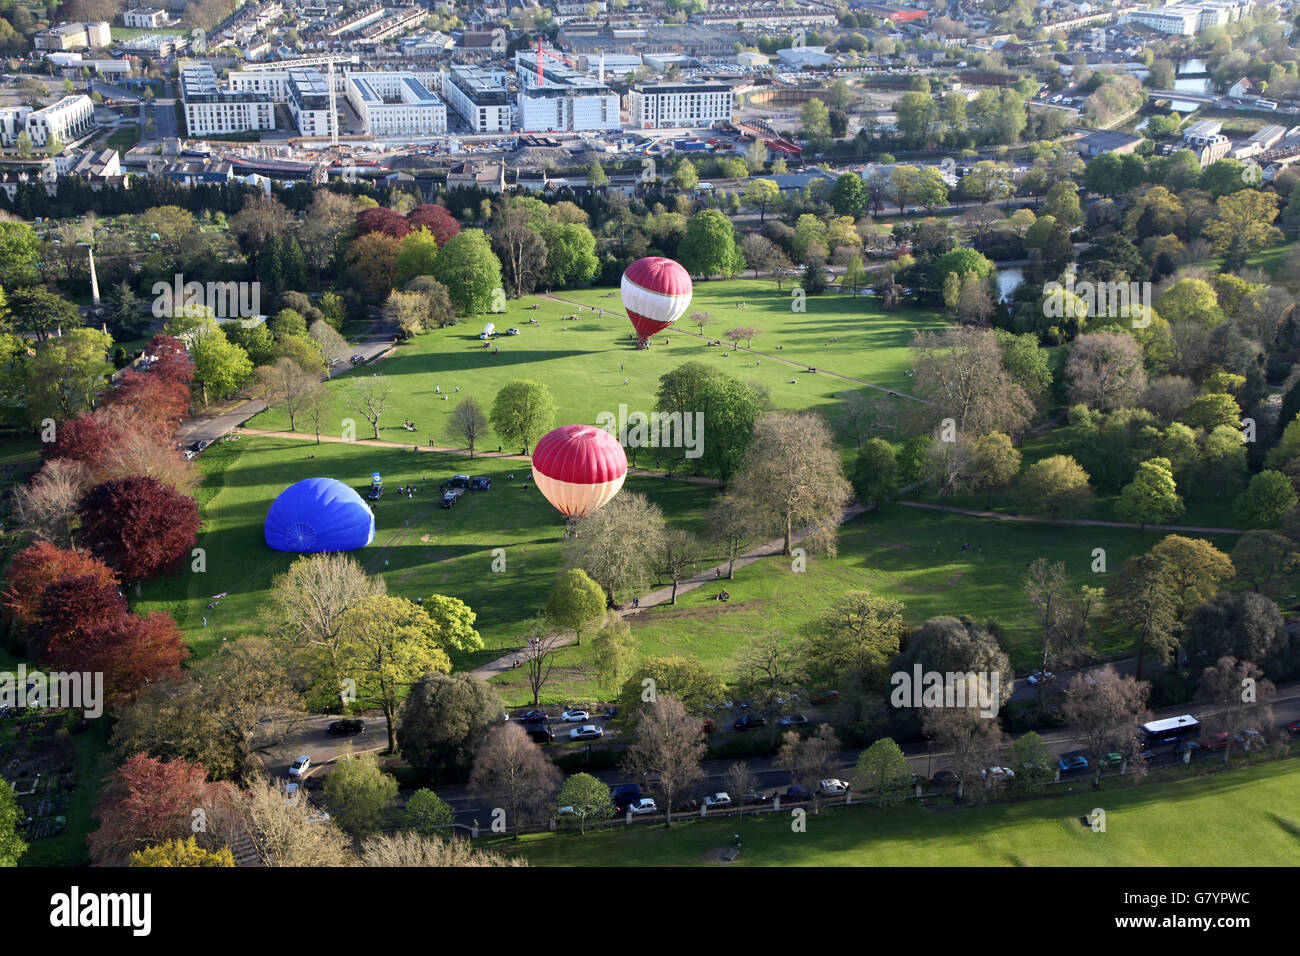 Three hot air balloons are made ready for an sunny evening flight in one of the Bath gardens Stock Photo